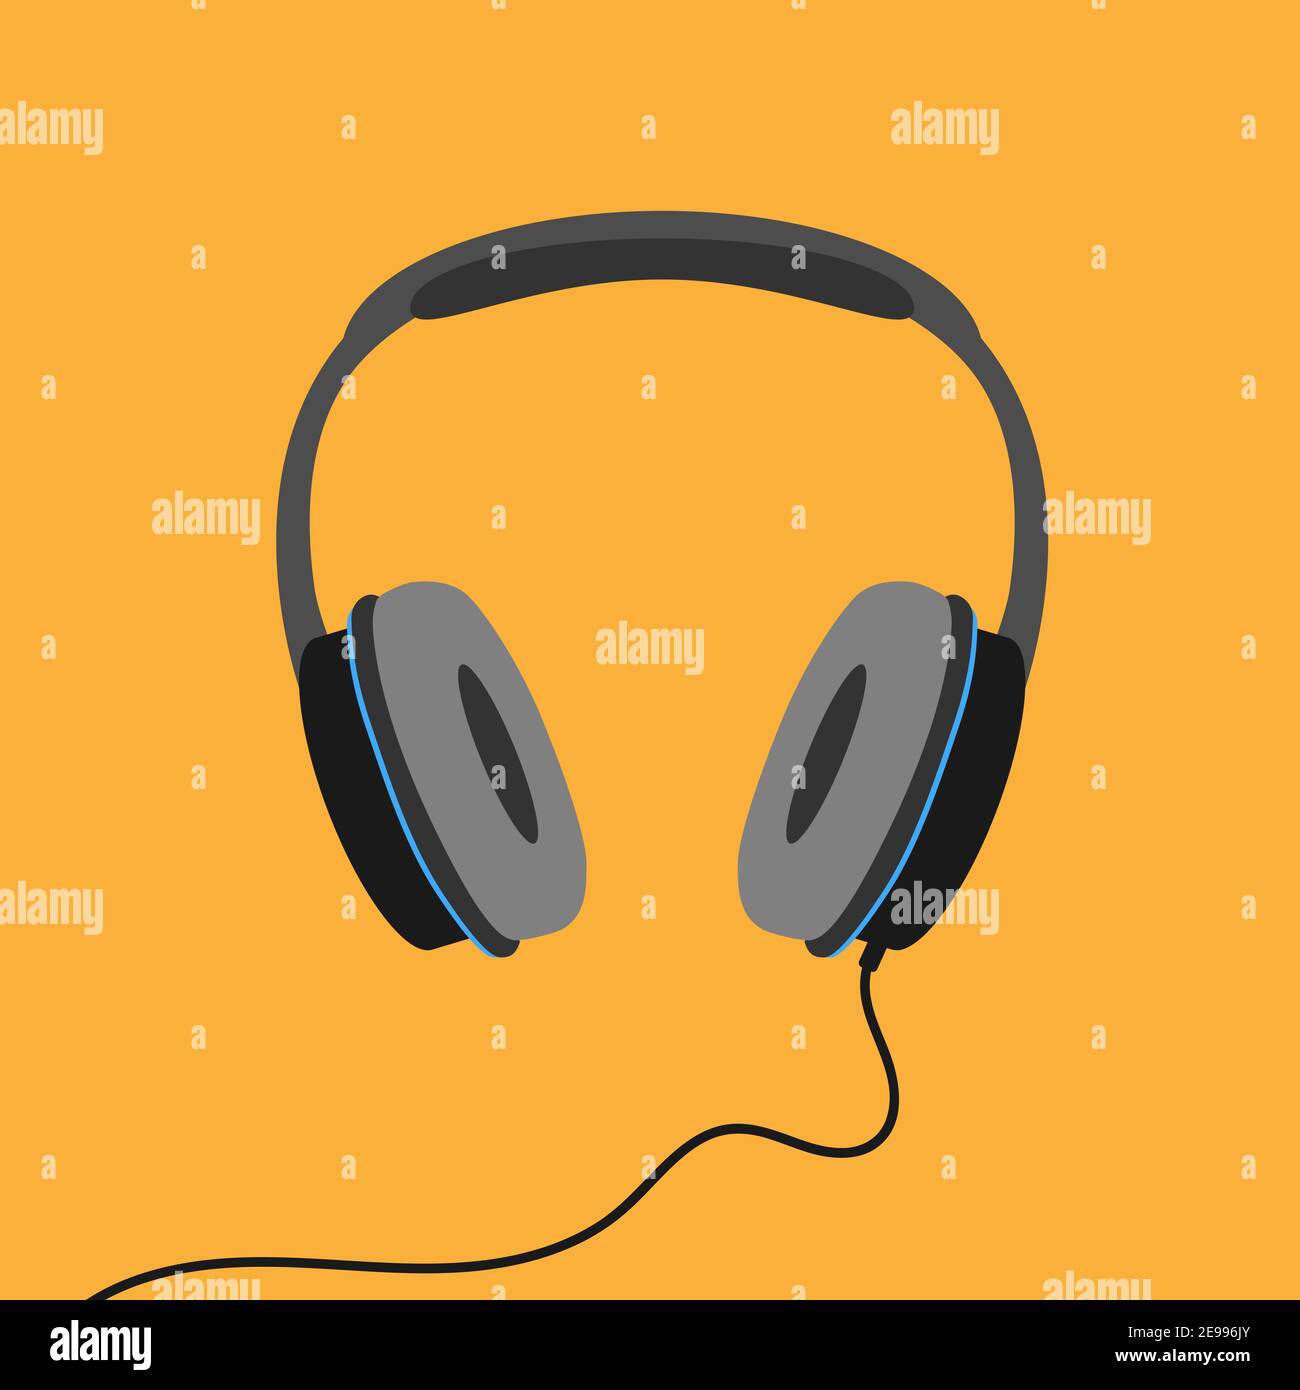 stereo headphones isolated on orange background, listen to music or podcast vector illustration Stock Vector